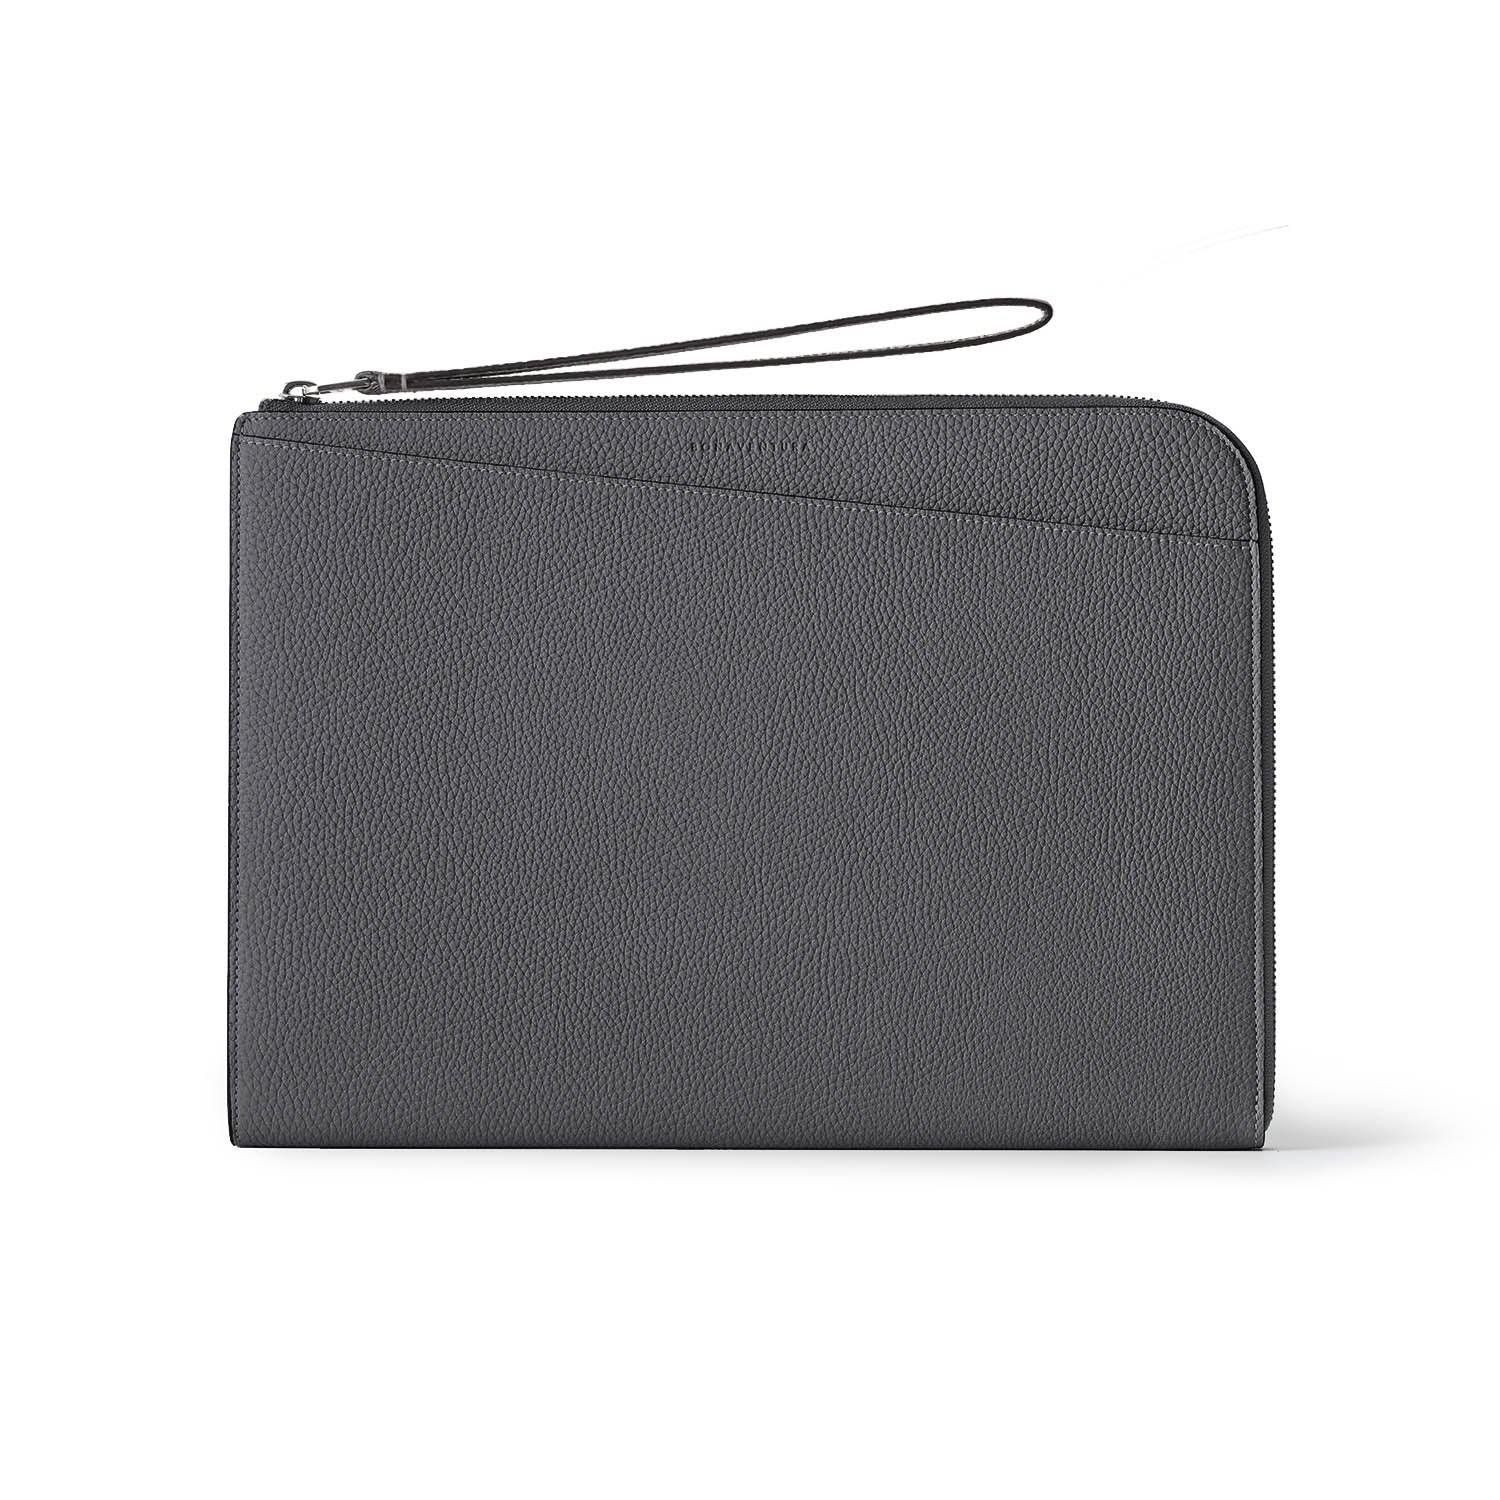 Fabio clutch bag in shrunk leather and charcoal grey